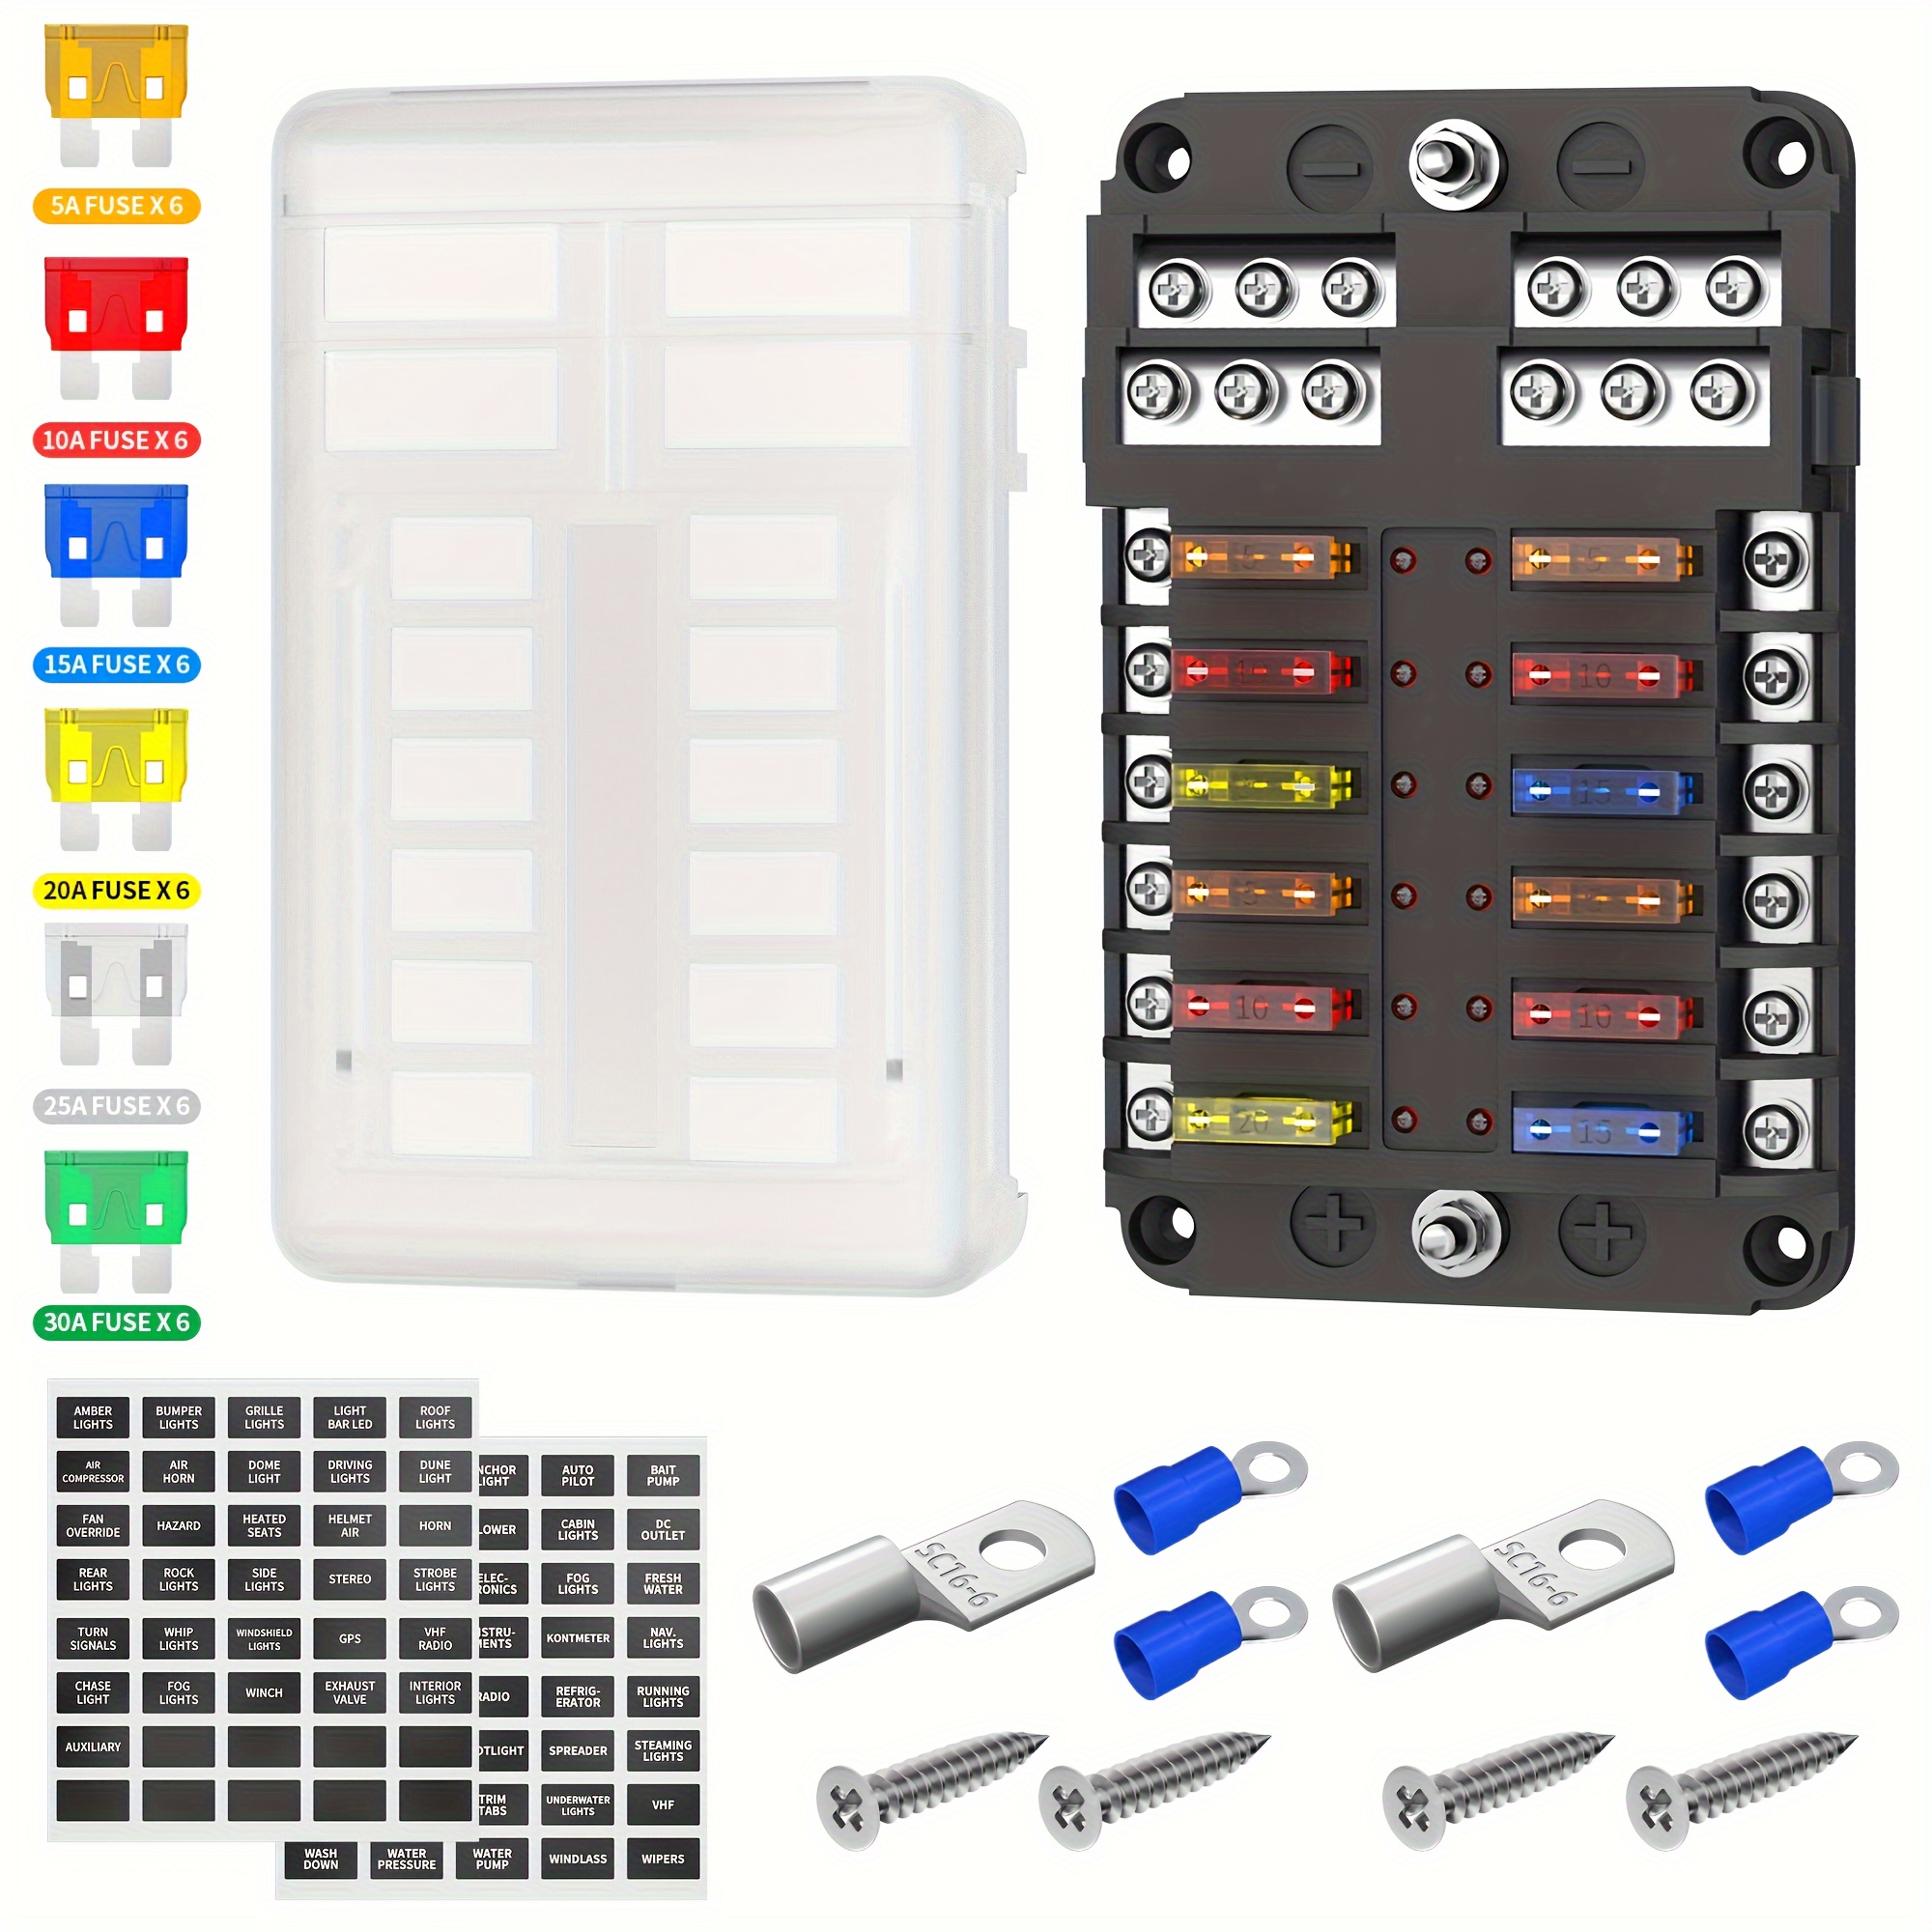 

12-way Blade Ato/atc Fuse Block With Led Indicator And Negative Bus Fuse Box Holder With Waterproof Cover 36pcs Terminals For Automotive Boat Car Rv